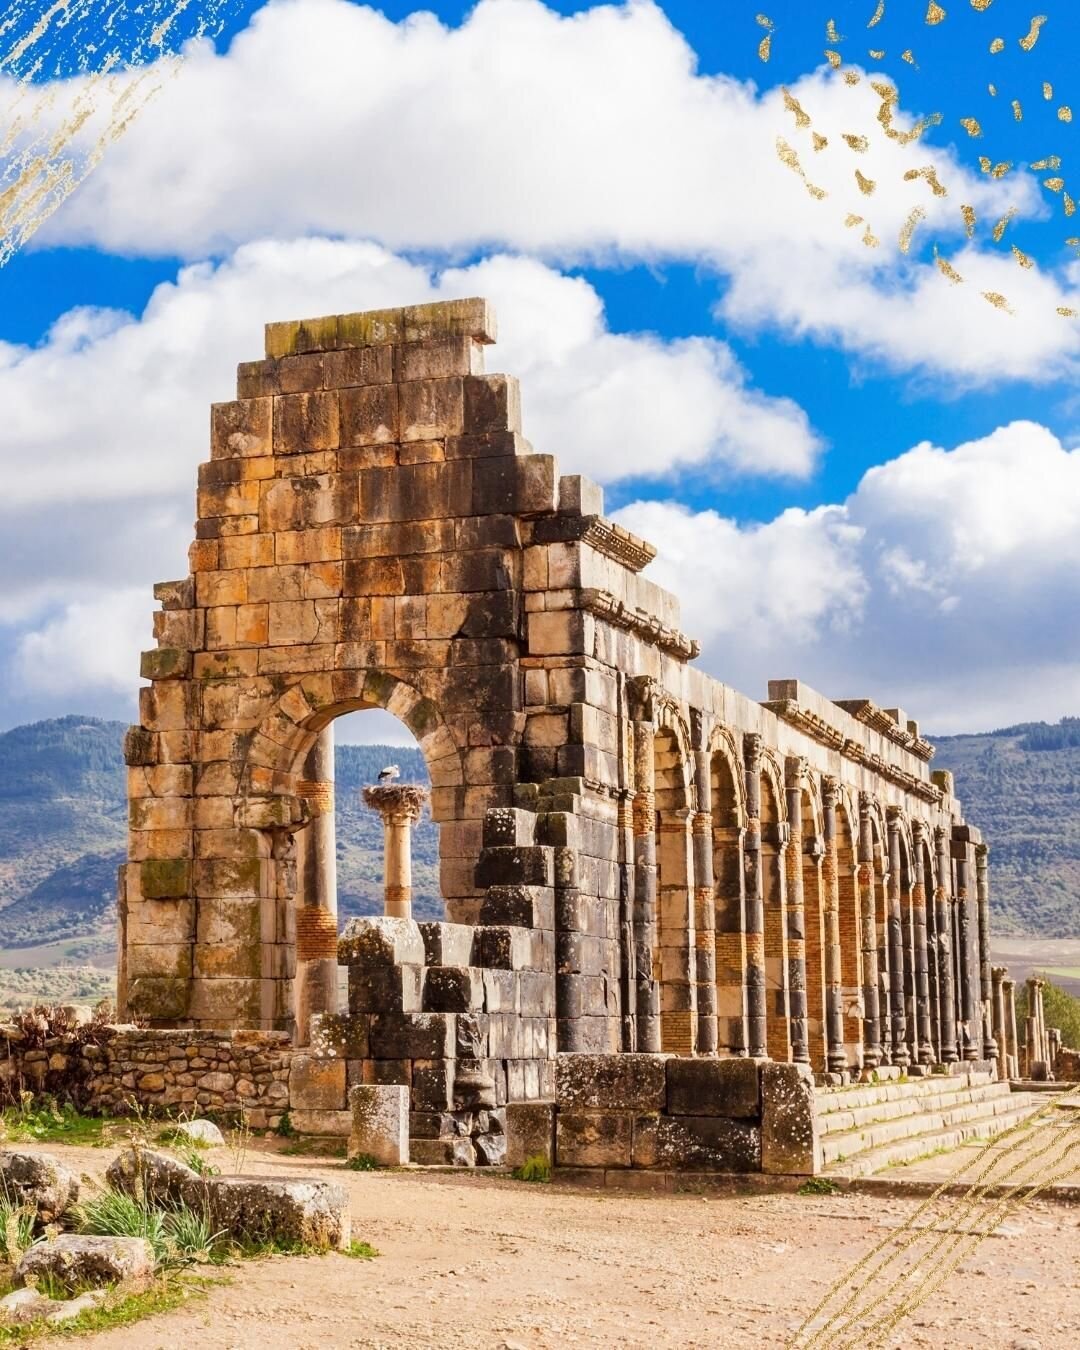 It is true that you would see more quantity of Roman ruins when visiting Italy (and other places in Europe), but it is incredibly unique to see Roman culture in Morocco. Of the nine UNESCO World Heritage Sites in Morocco, seven of them are old cities